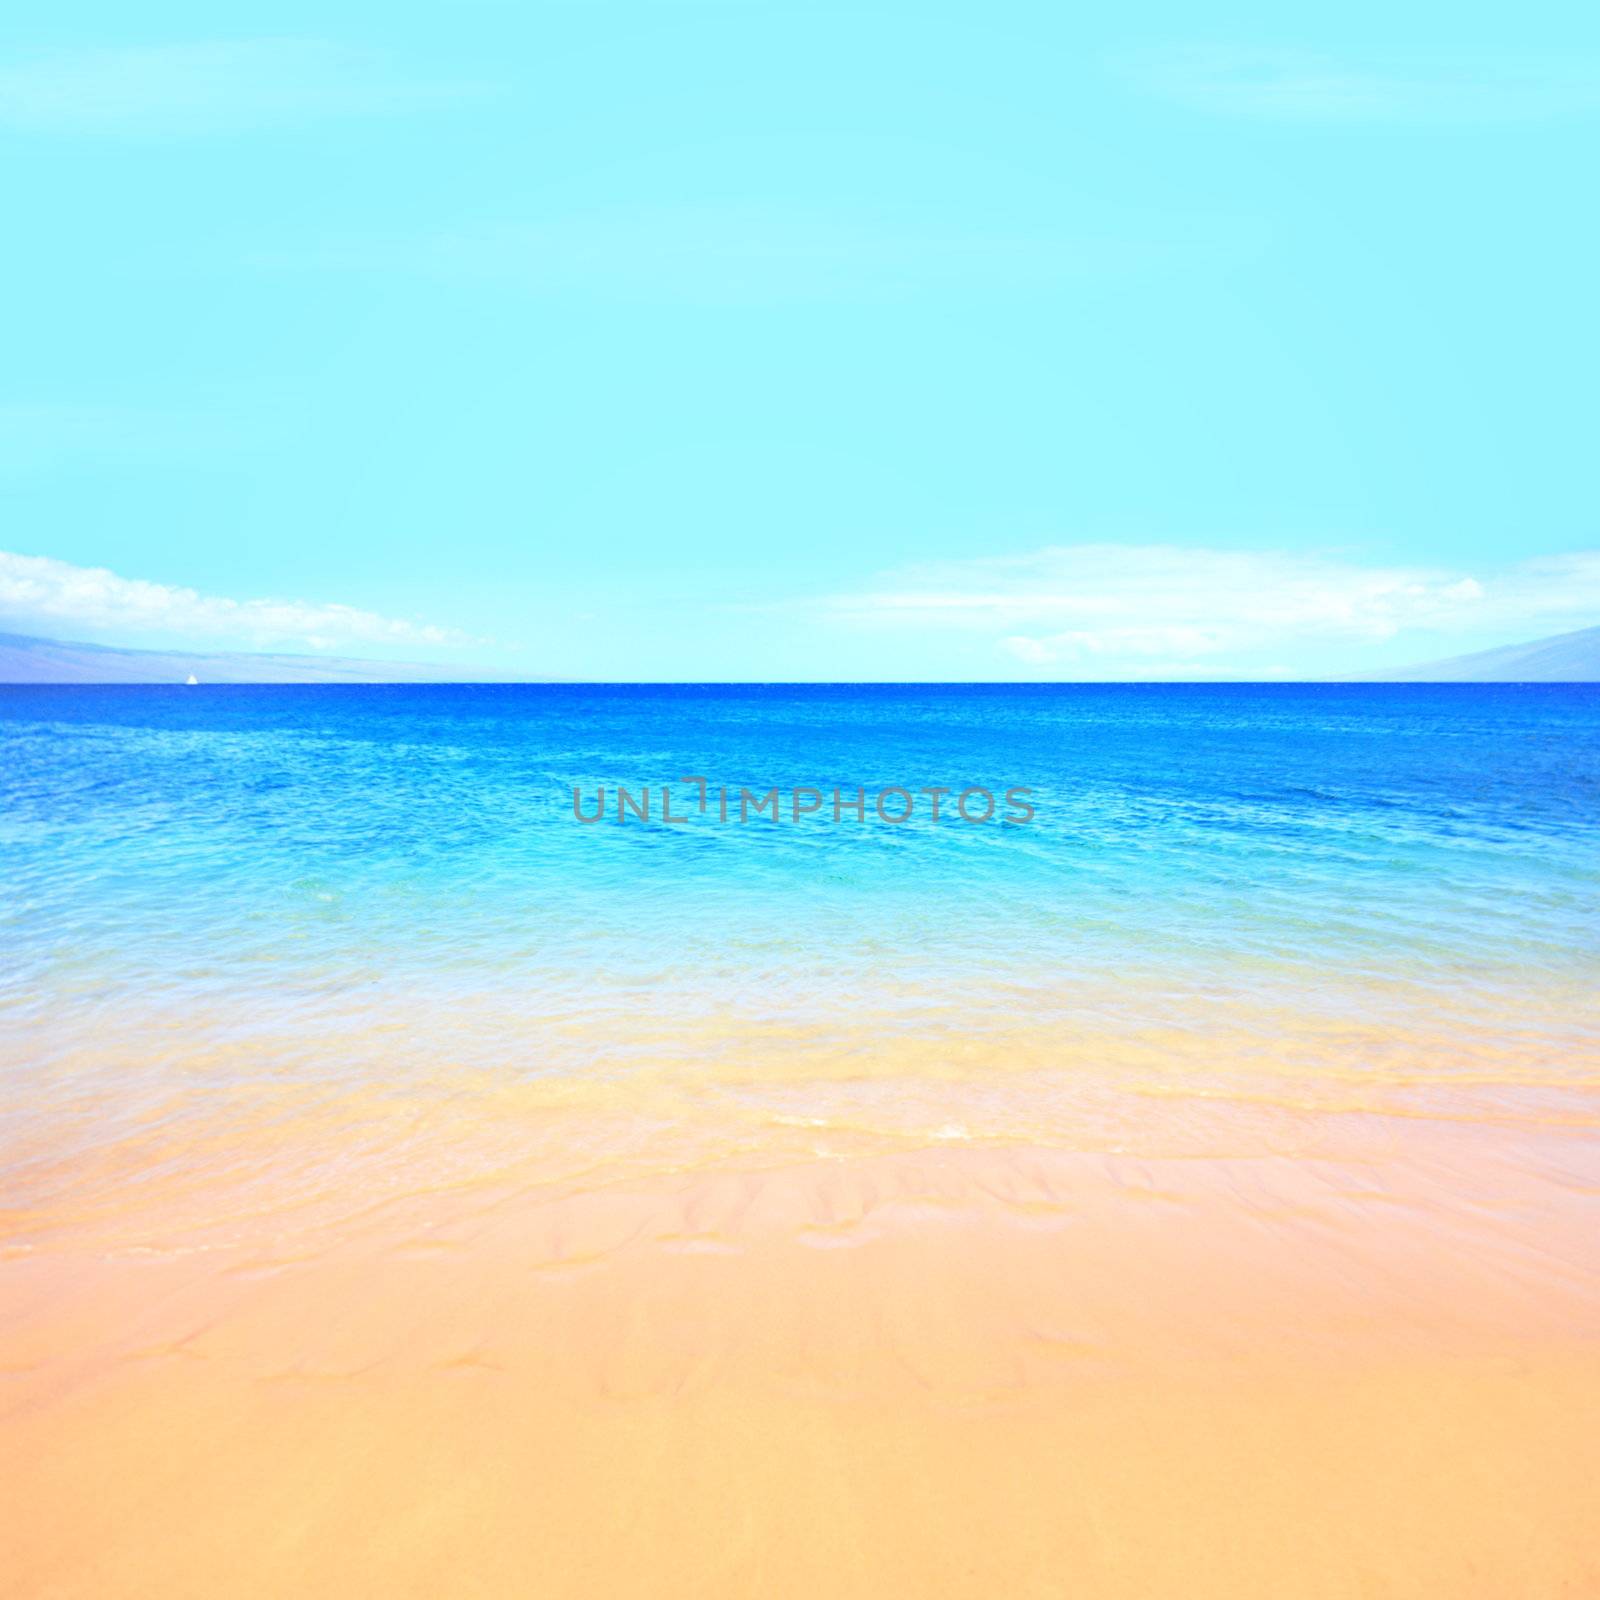 Beach ocean background texture. Blue water, sky, sand and beach. Travel, vacation and summer holidays getaway concept photo from Maui, Hawaii.